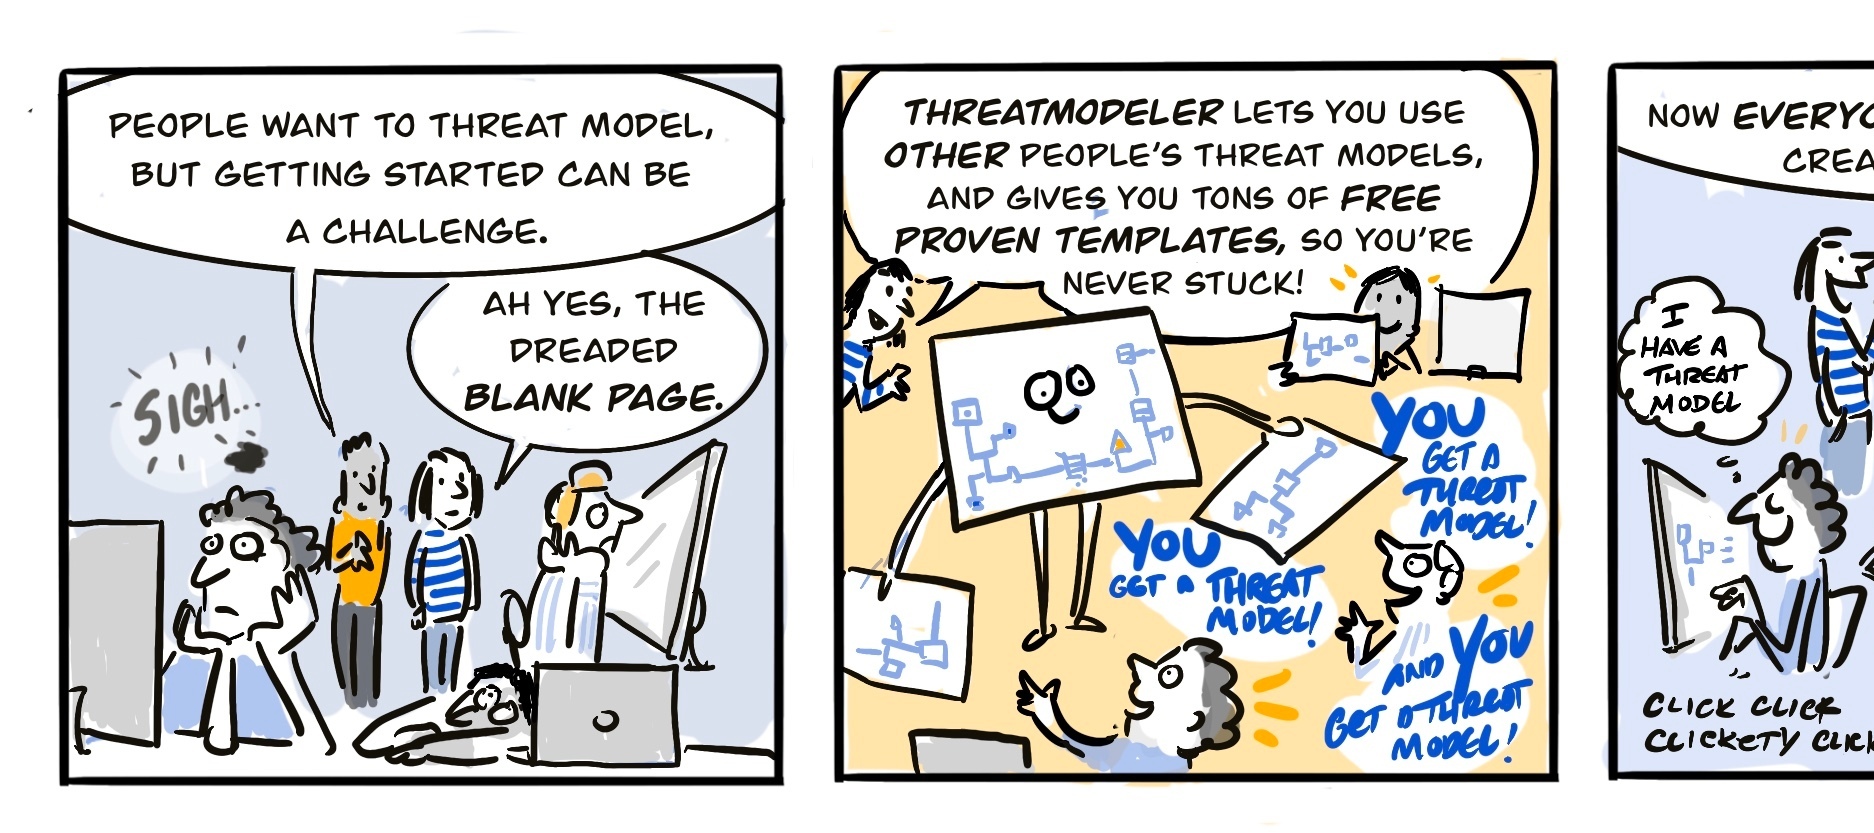 You get a threat model!